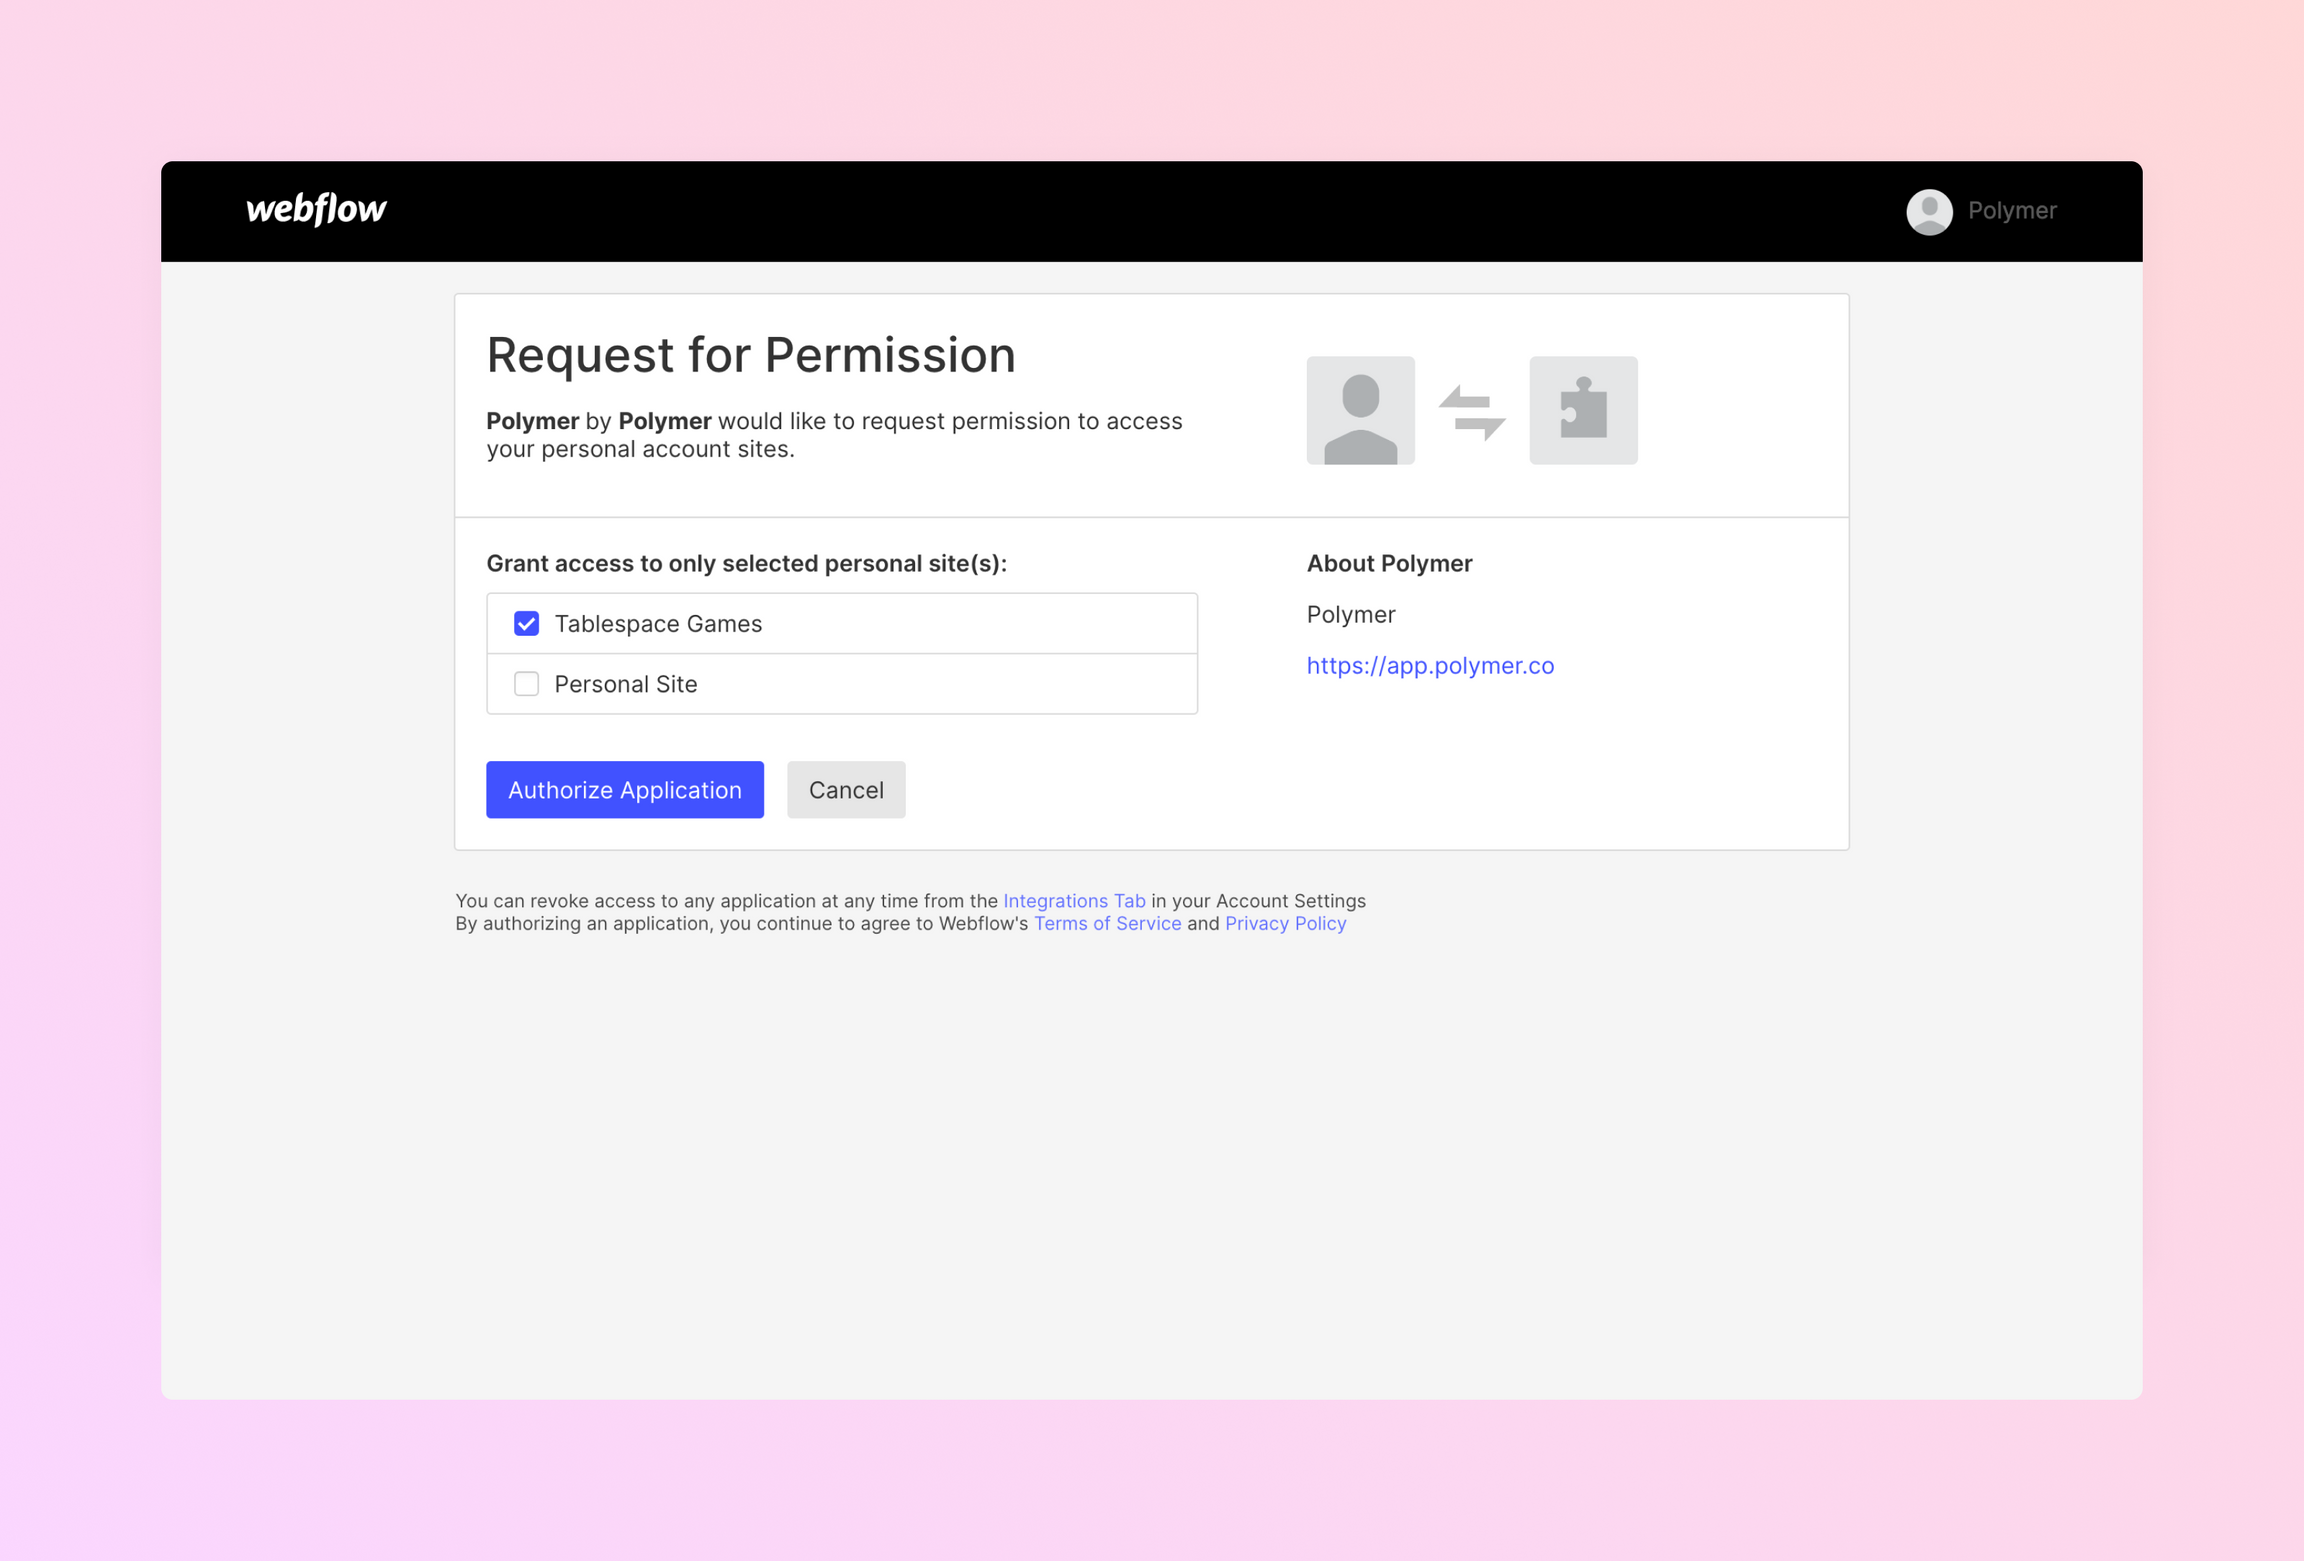 the Request for Permission screen in Webflow